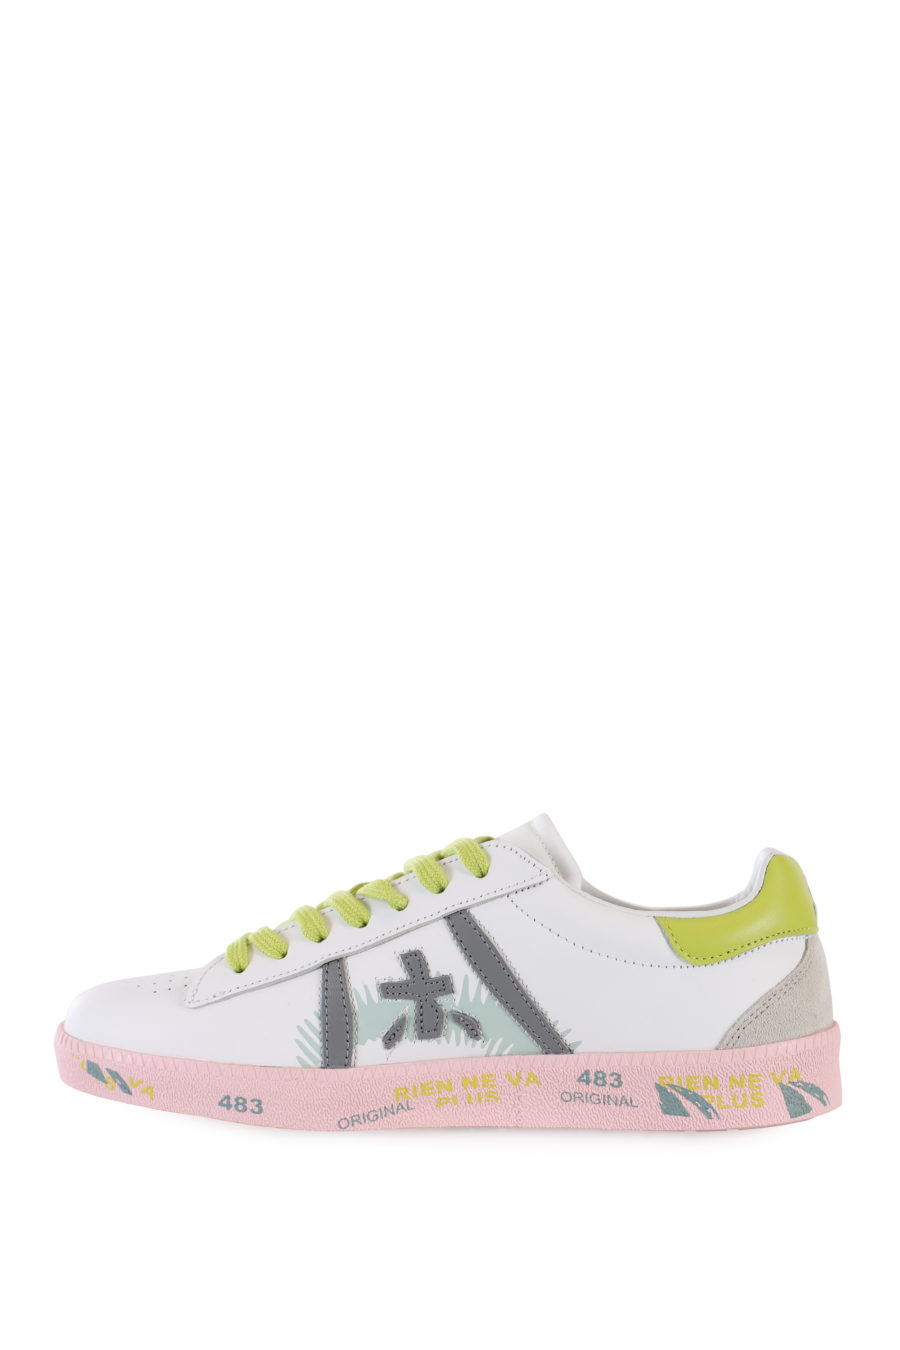 White trainers with green details and pink sole "Andyd" - IMG 1699